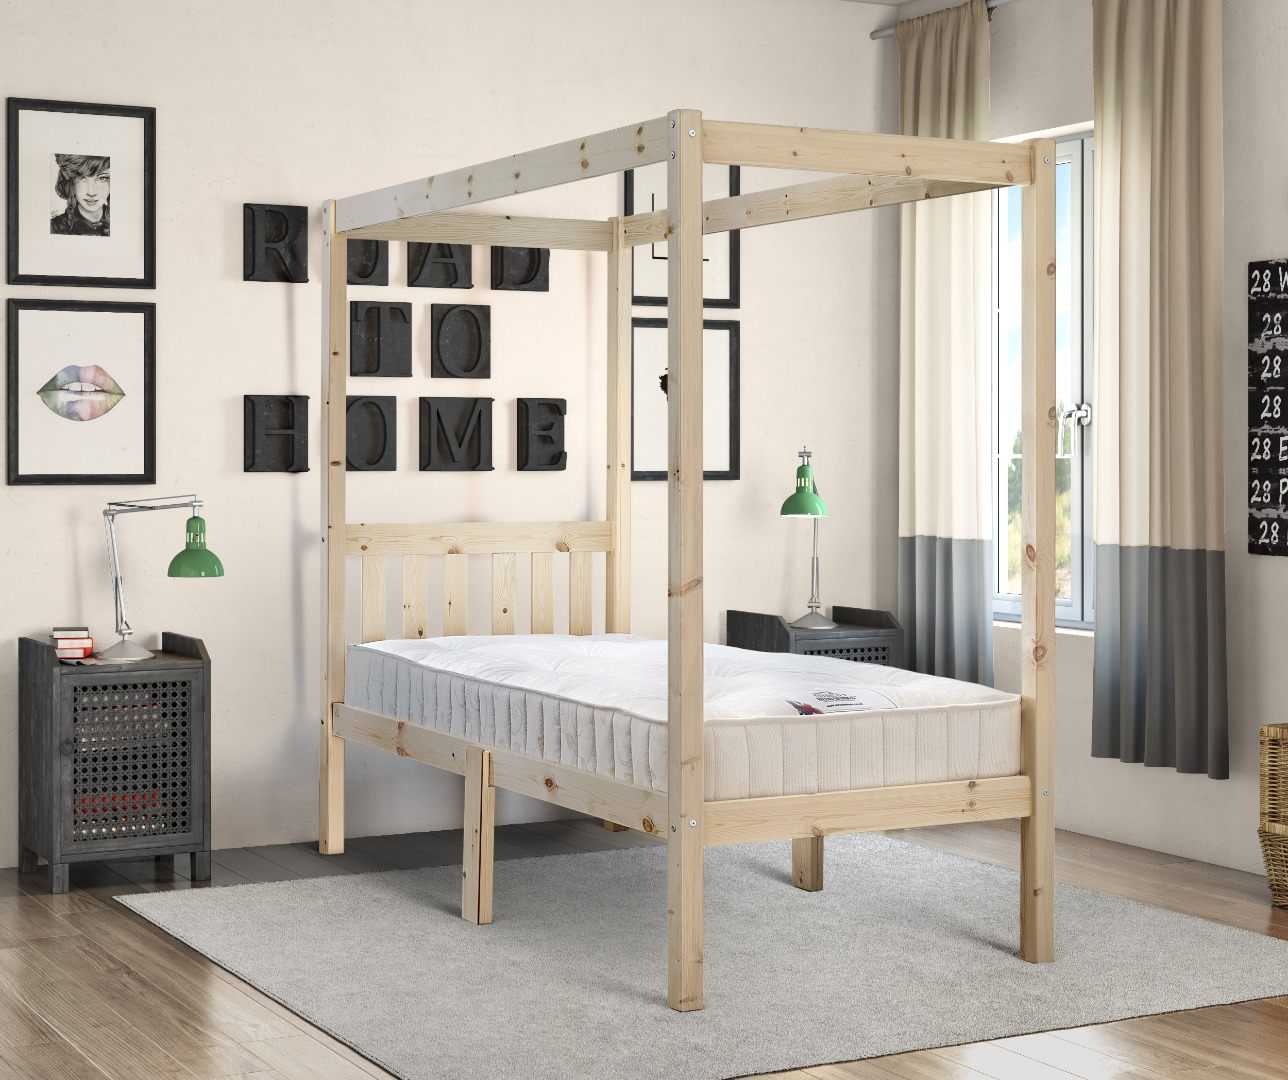 Quattro Heavy Duty Four Poster Pine Bed Frame